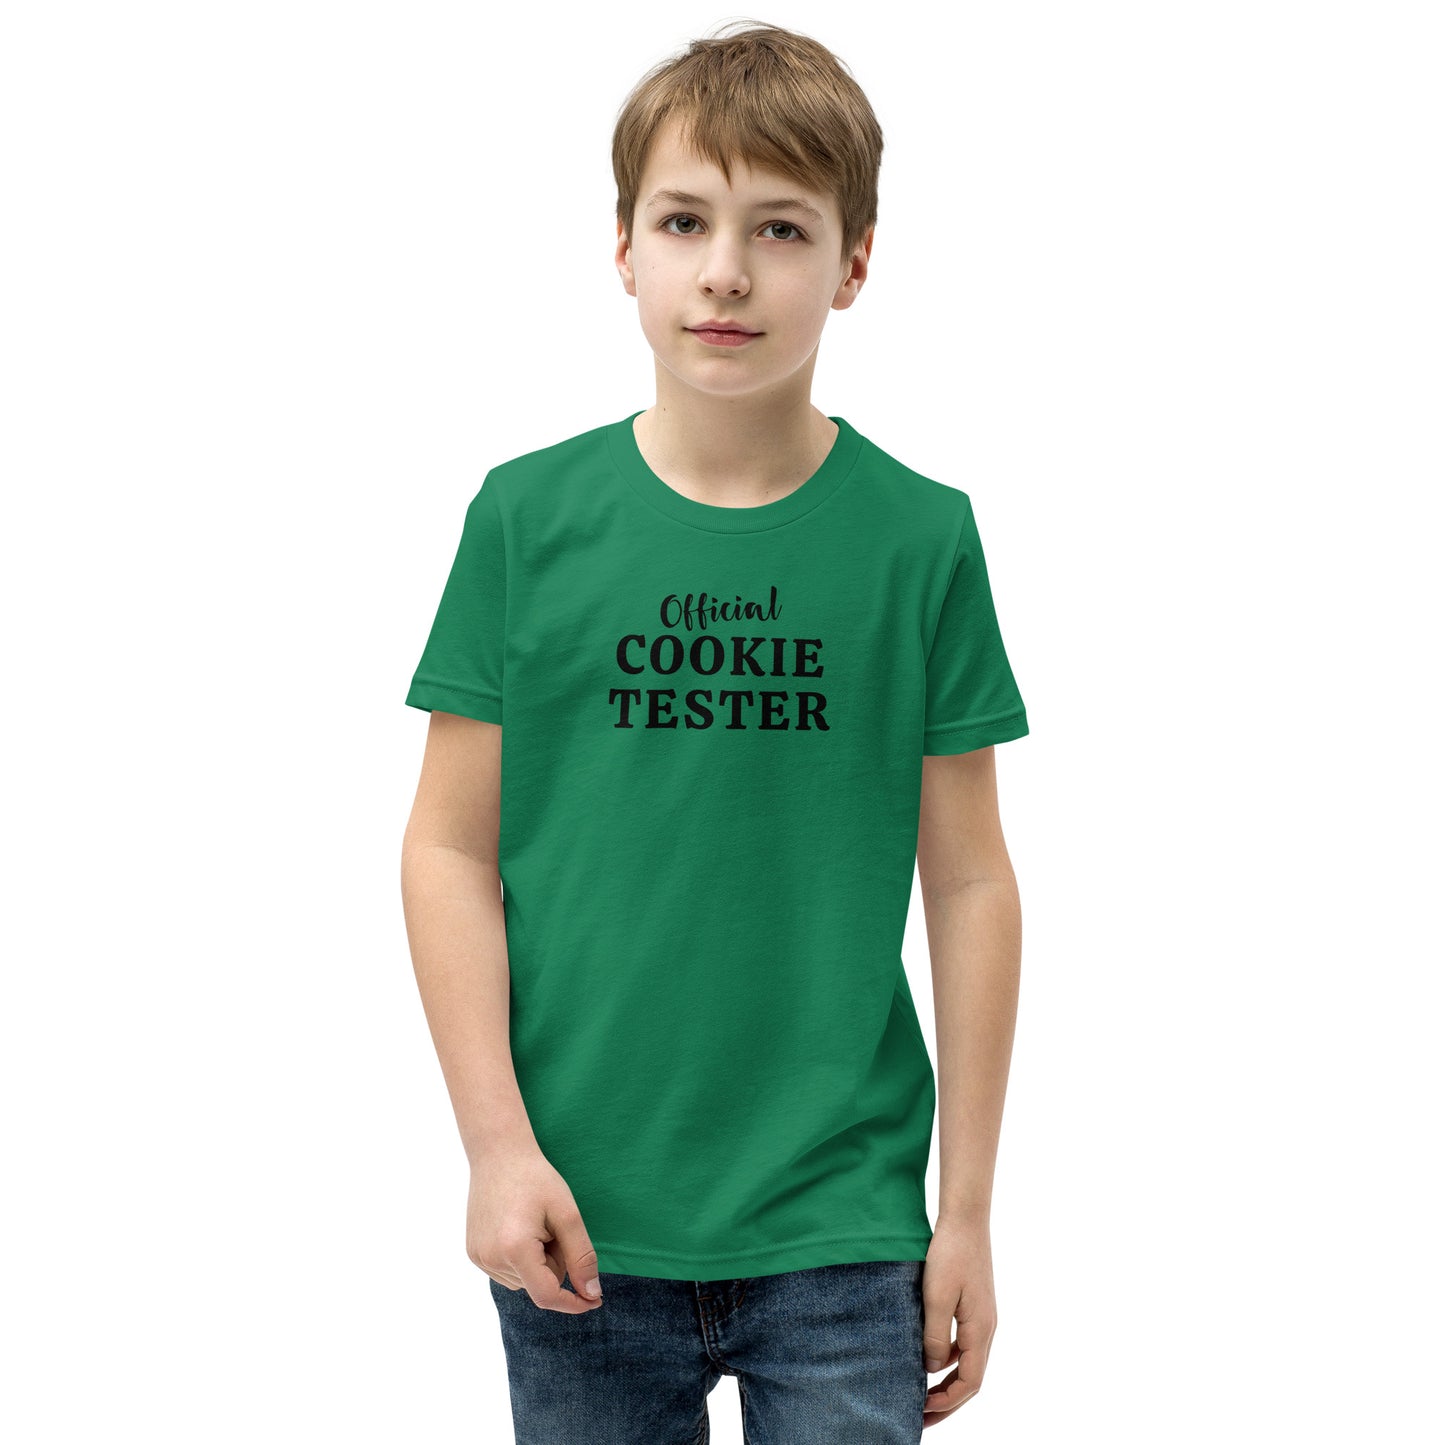 Official Cookie Tester | T-Shirt | Youth